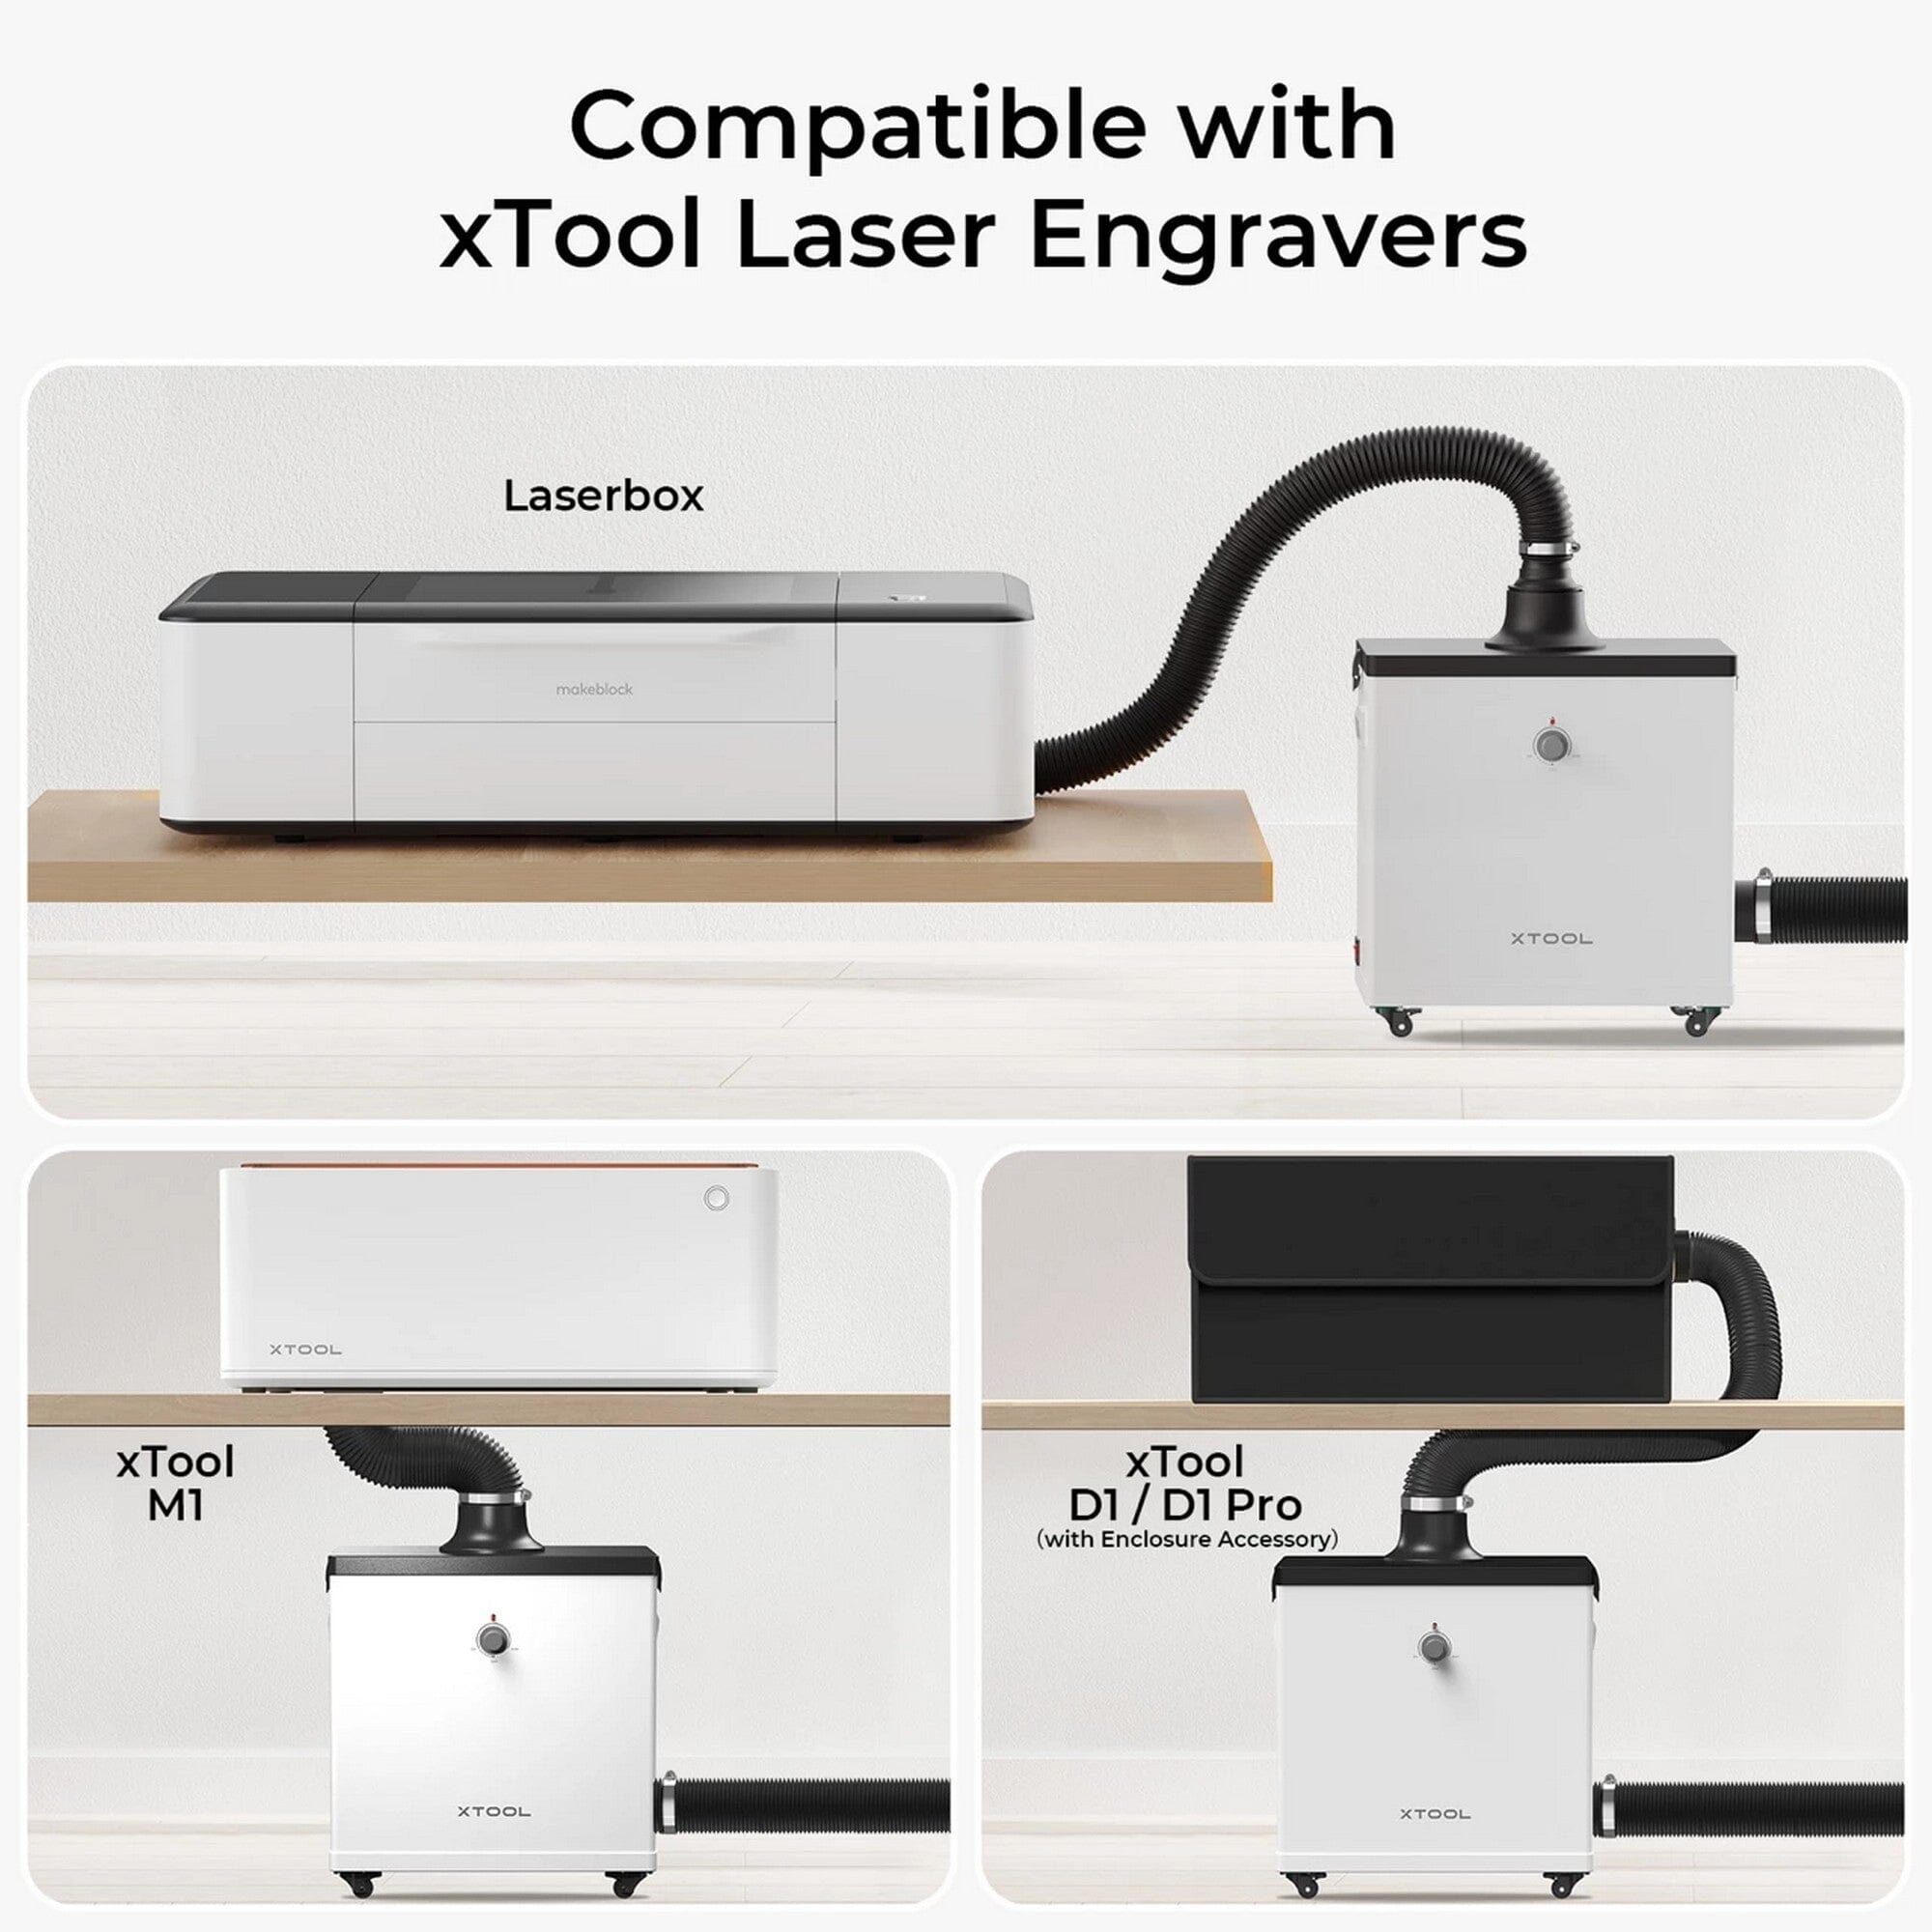 xTool Smoke & Air Purifier for xTool P2, M1, S1, D1, D1 Pro Laser Cutters